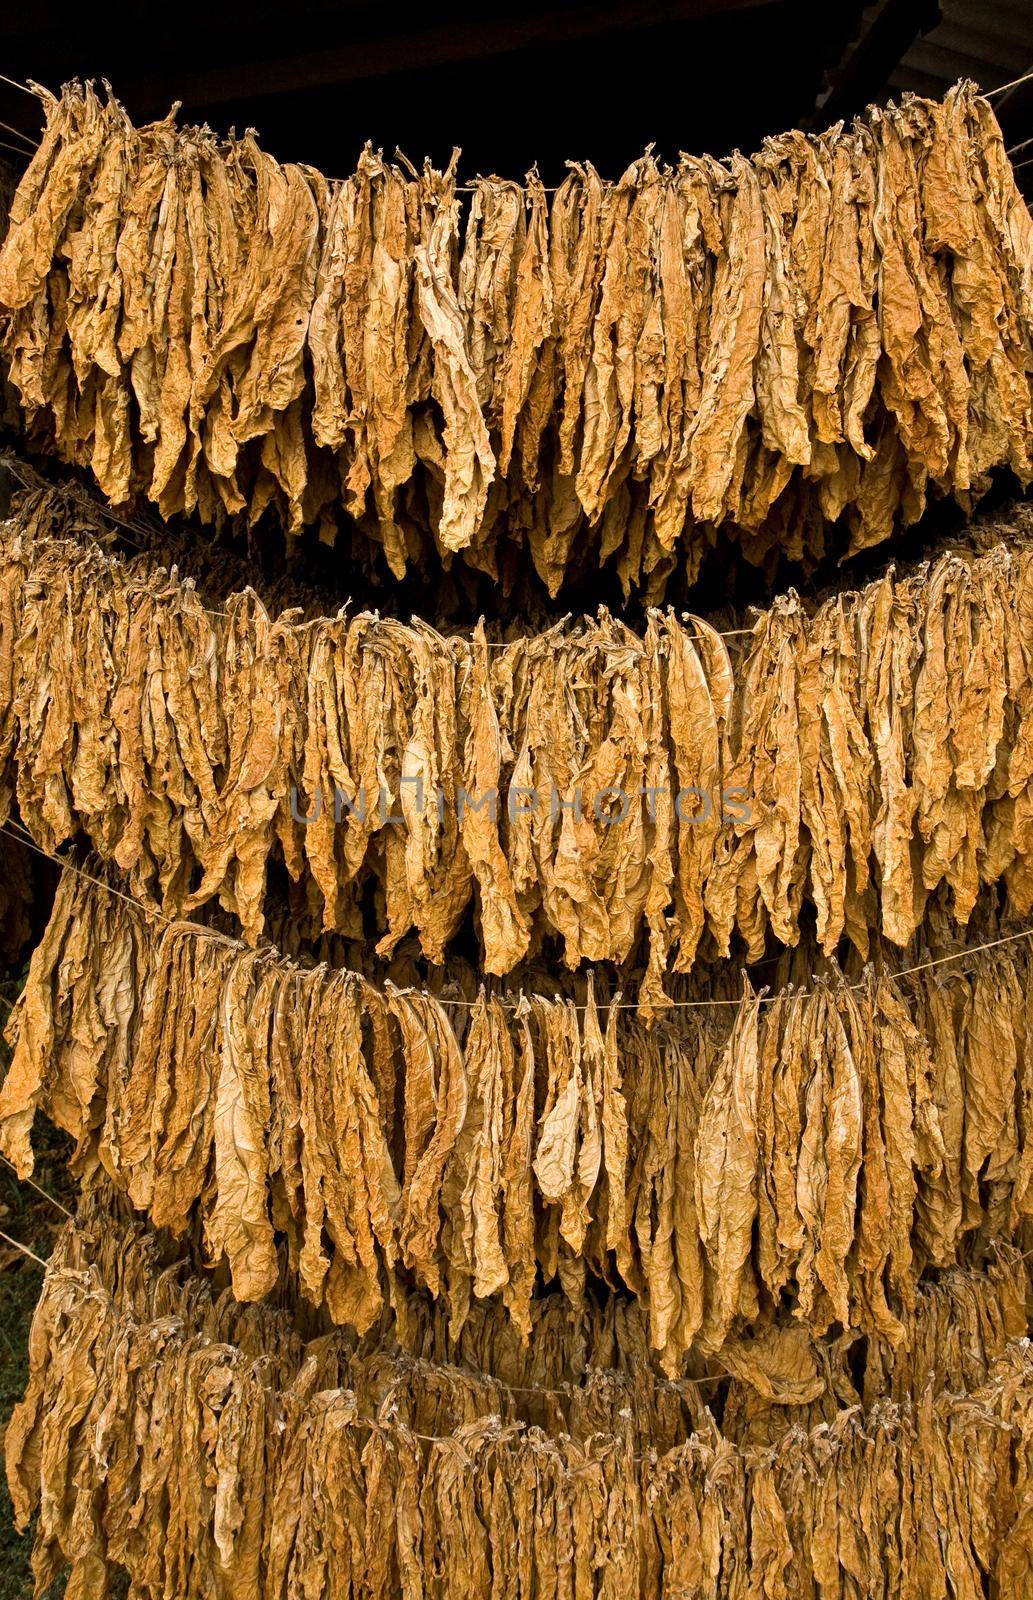 The classic method of drying tobacco in the barn